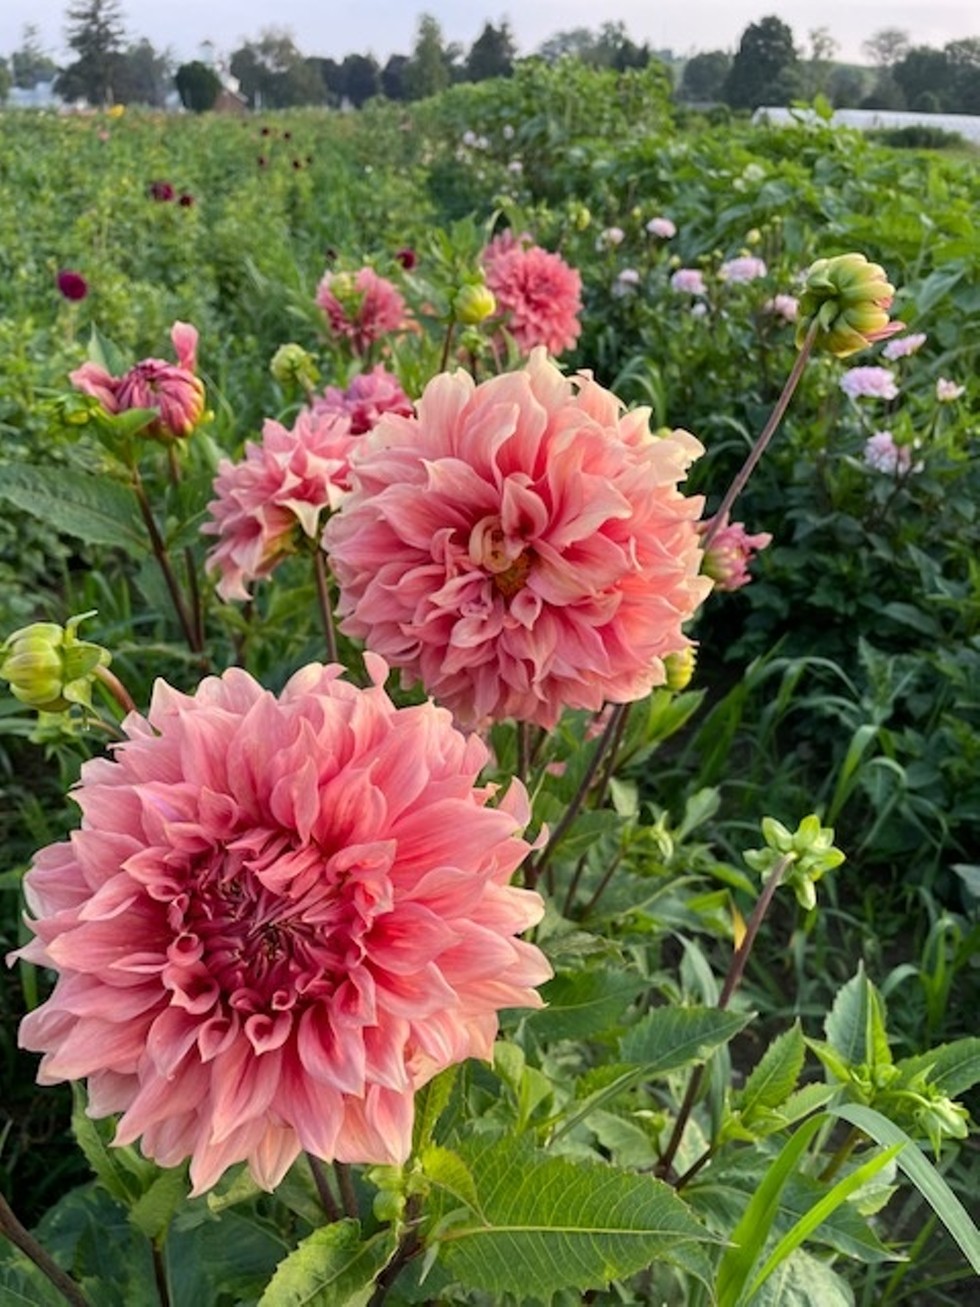 Growing Dahlias is one of many workshops being offered.